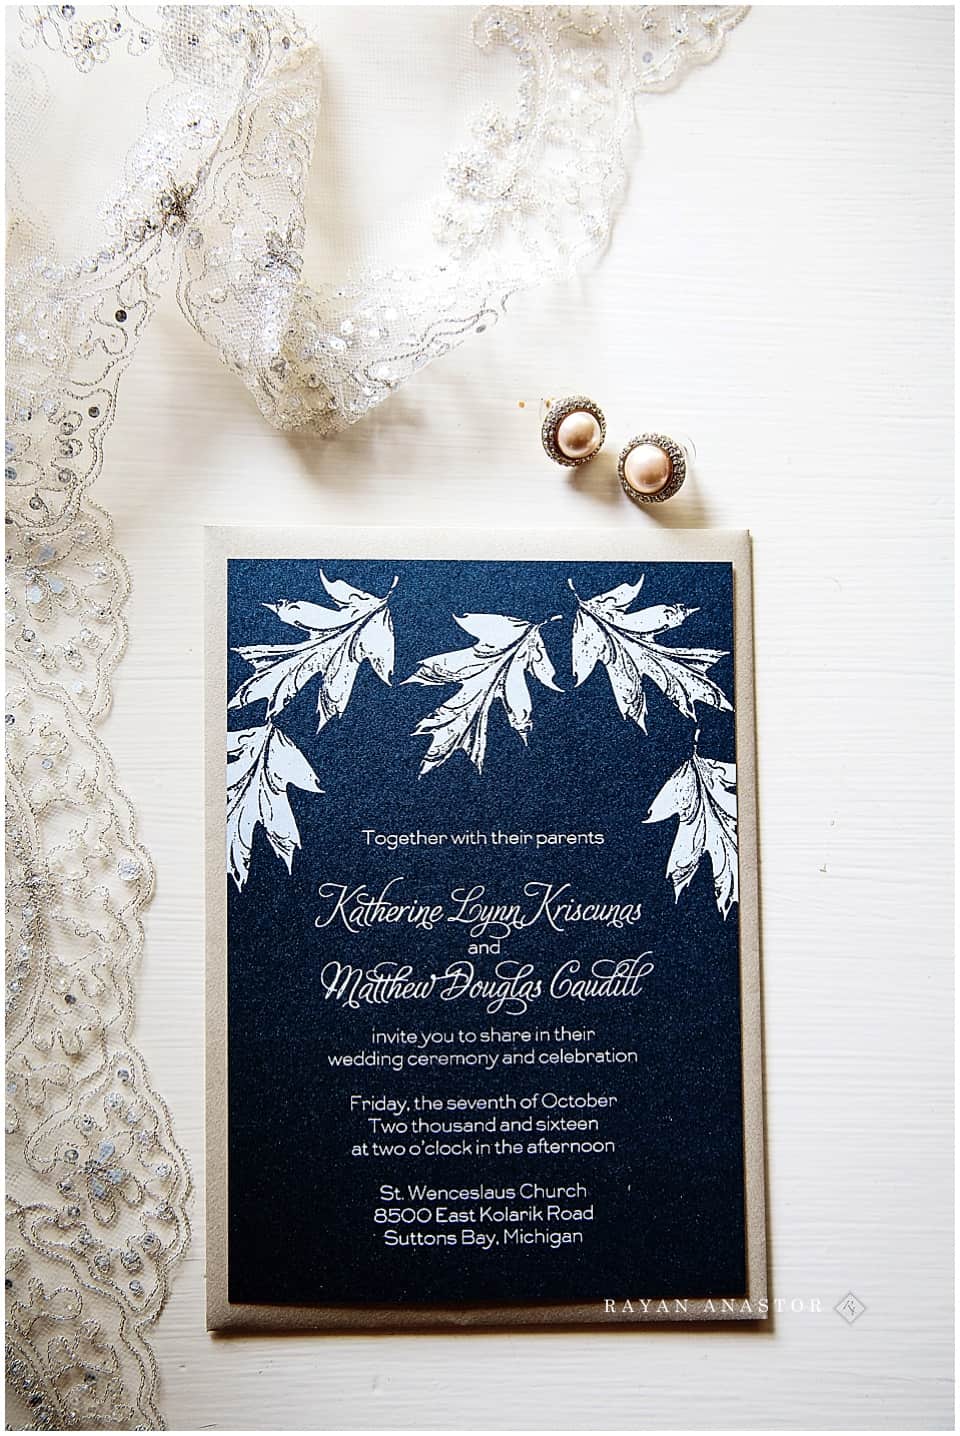 Wedding invitation with veil and earrings